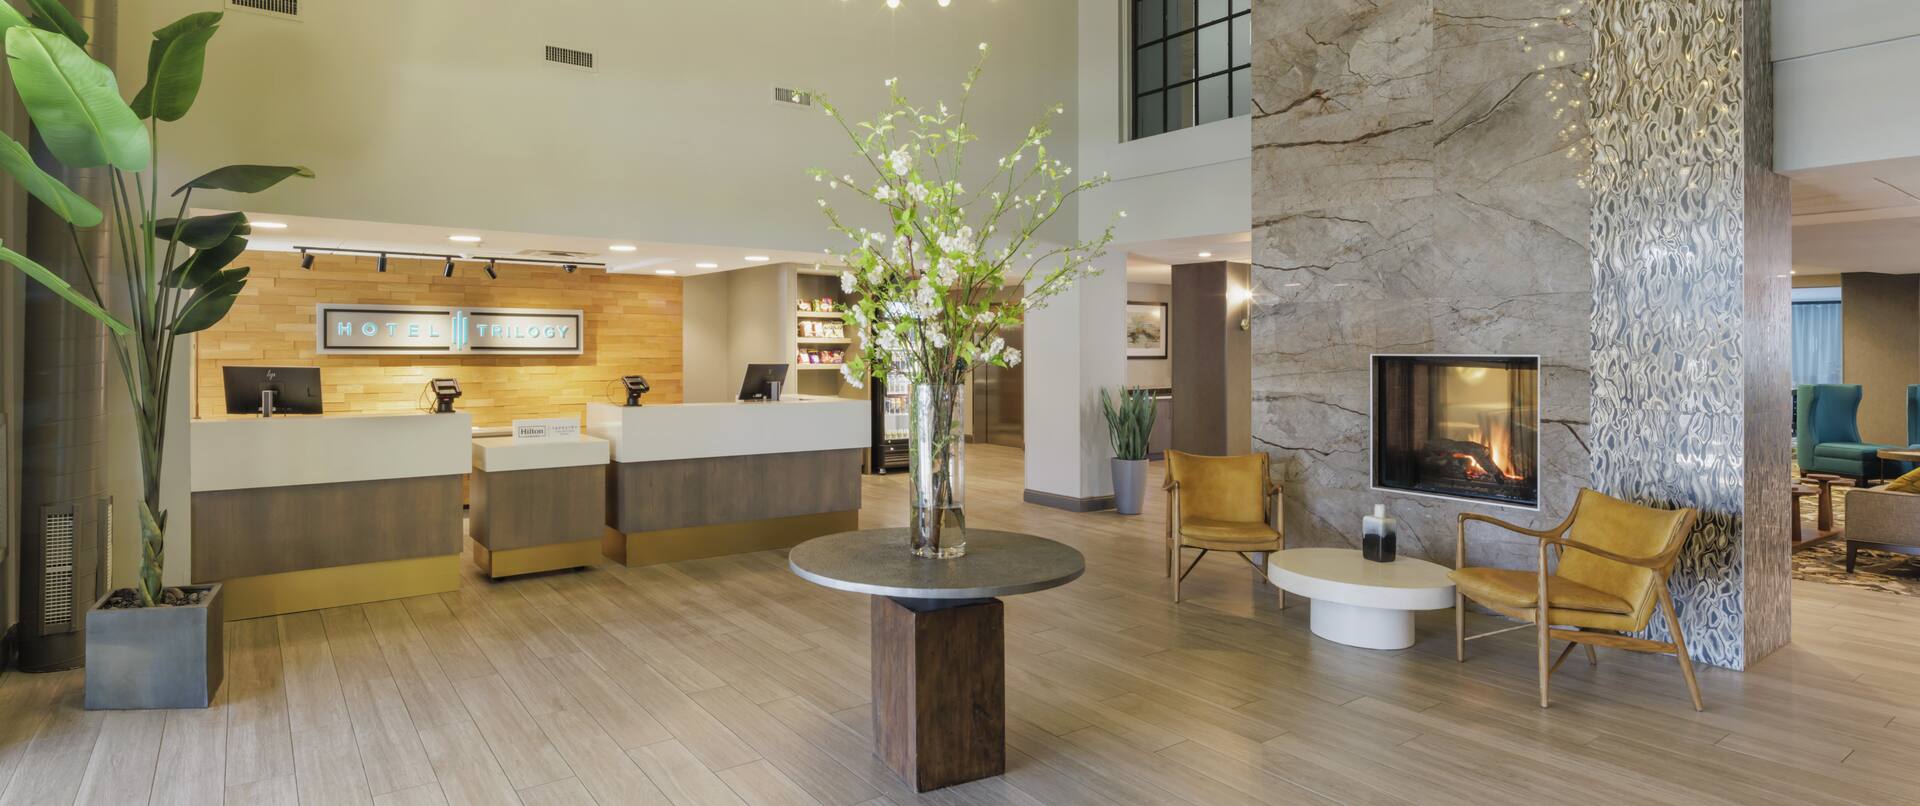 Lobby area with front desk, tables and chairs